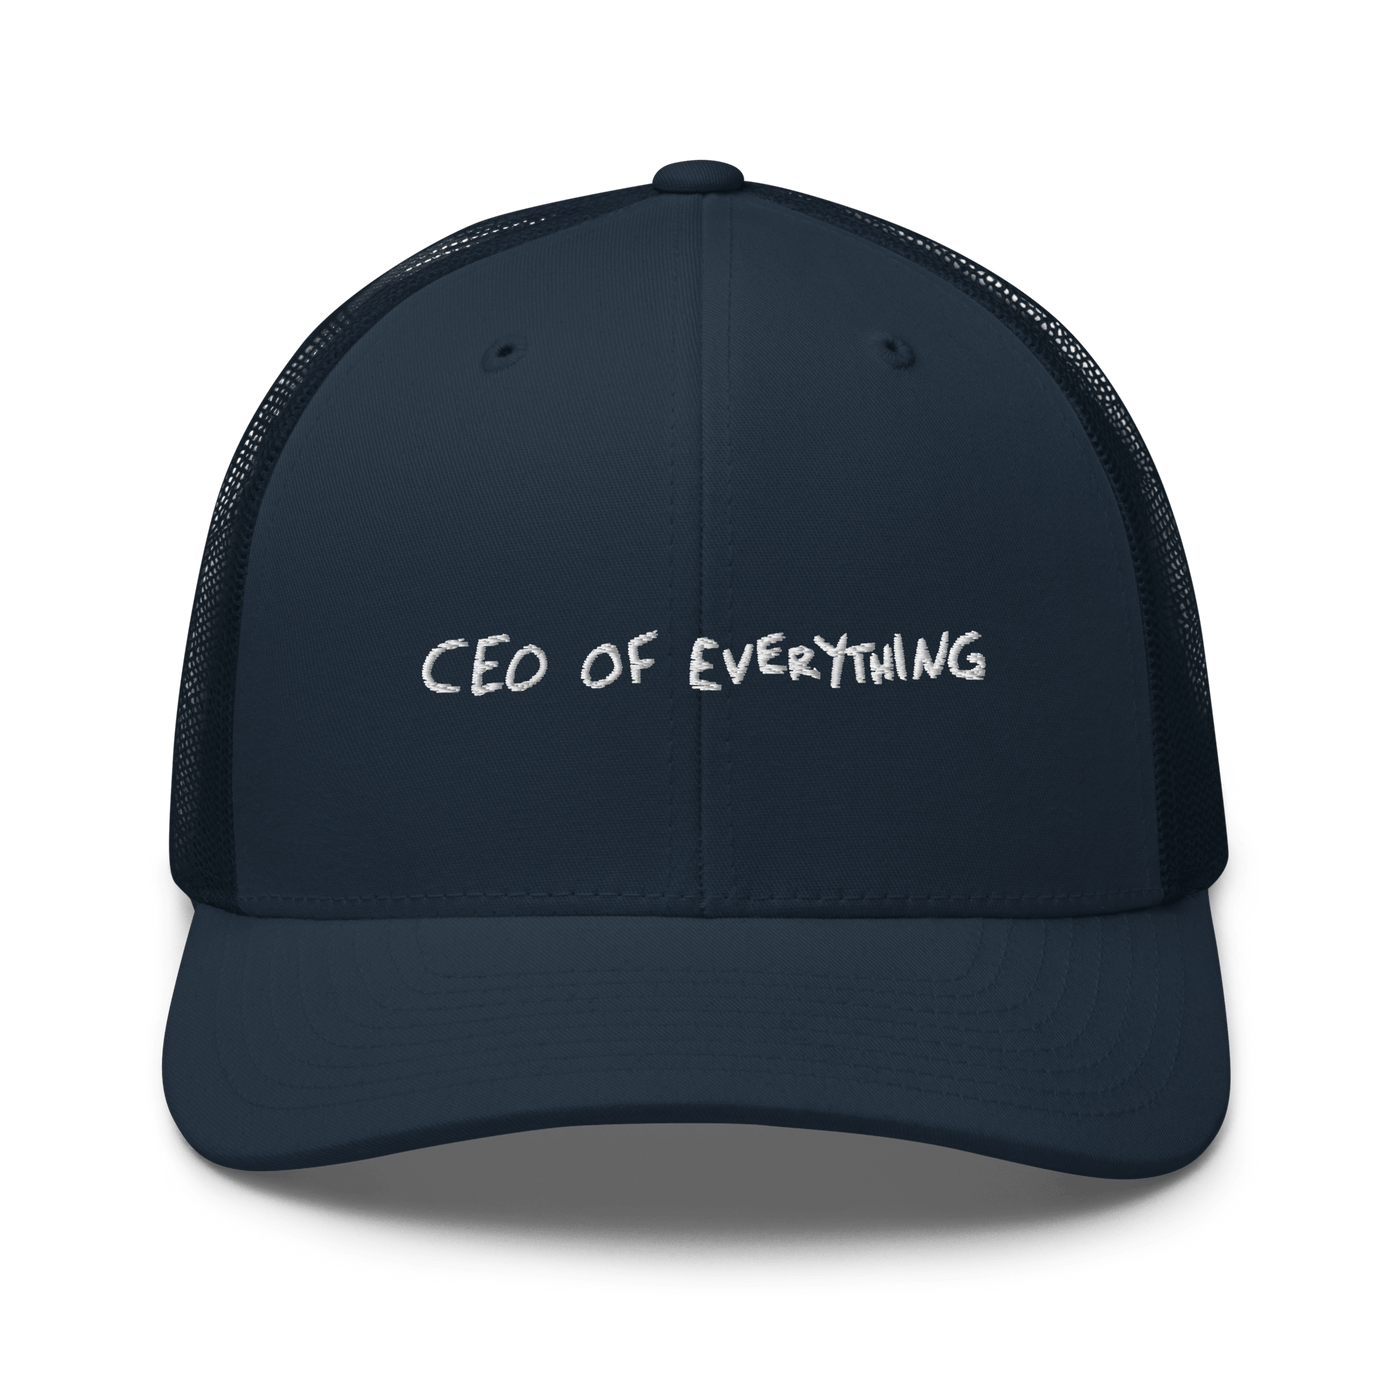 CEO of everything Trucker Cap - Navy - - Just Another Cap Store